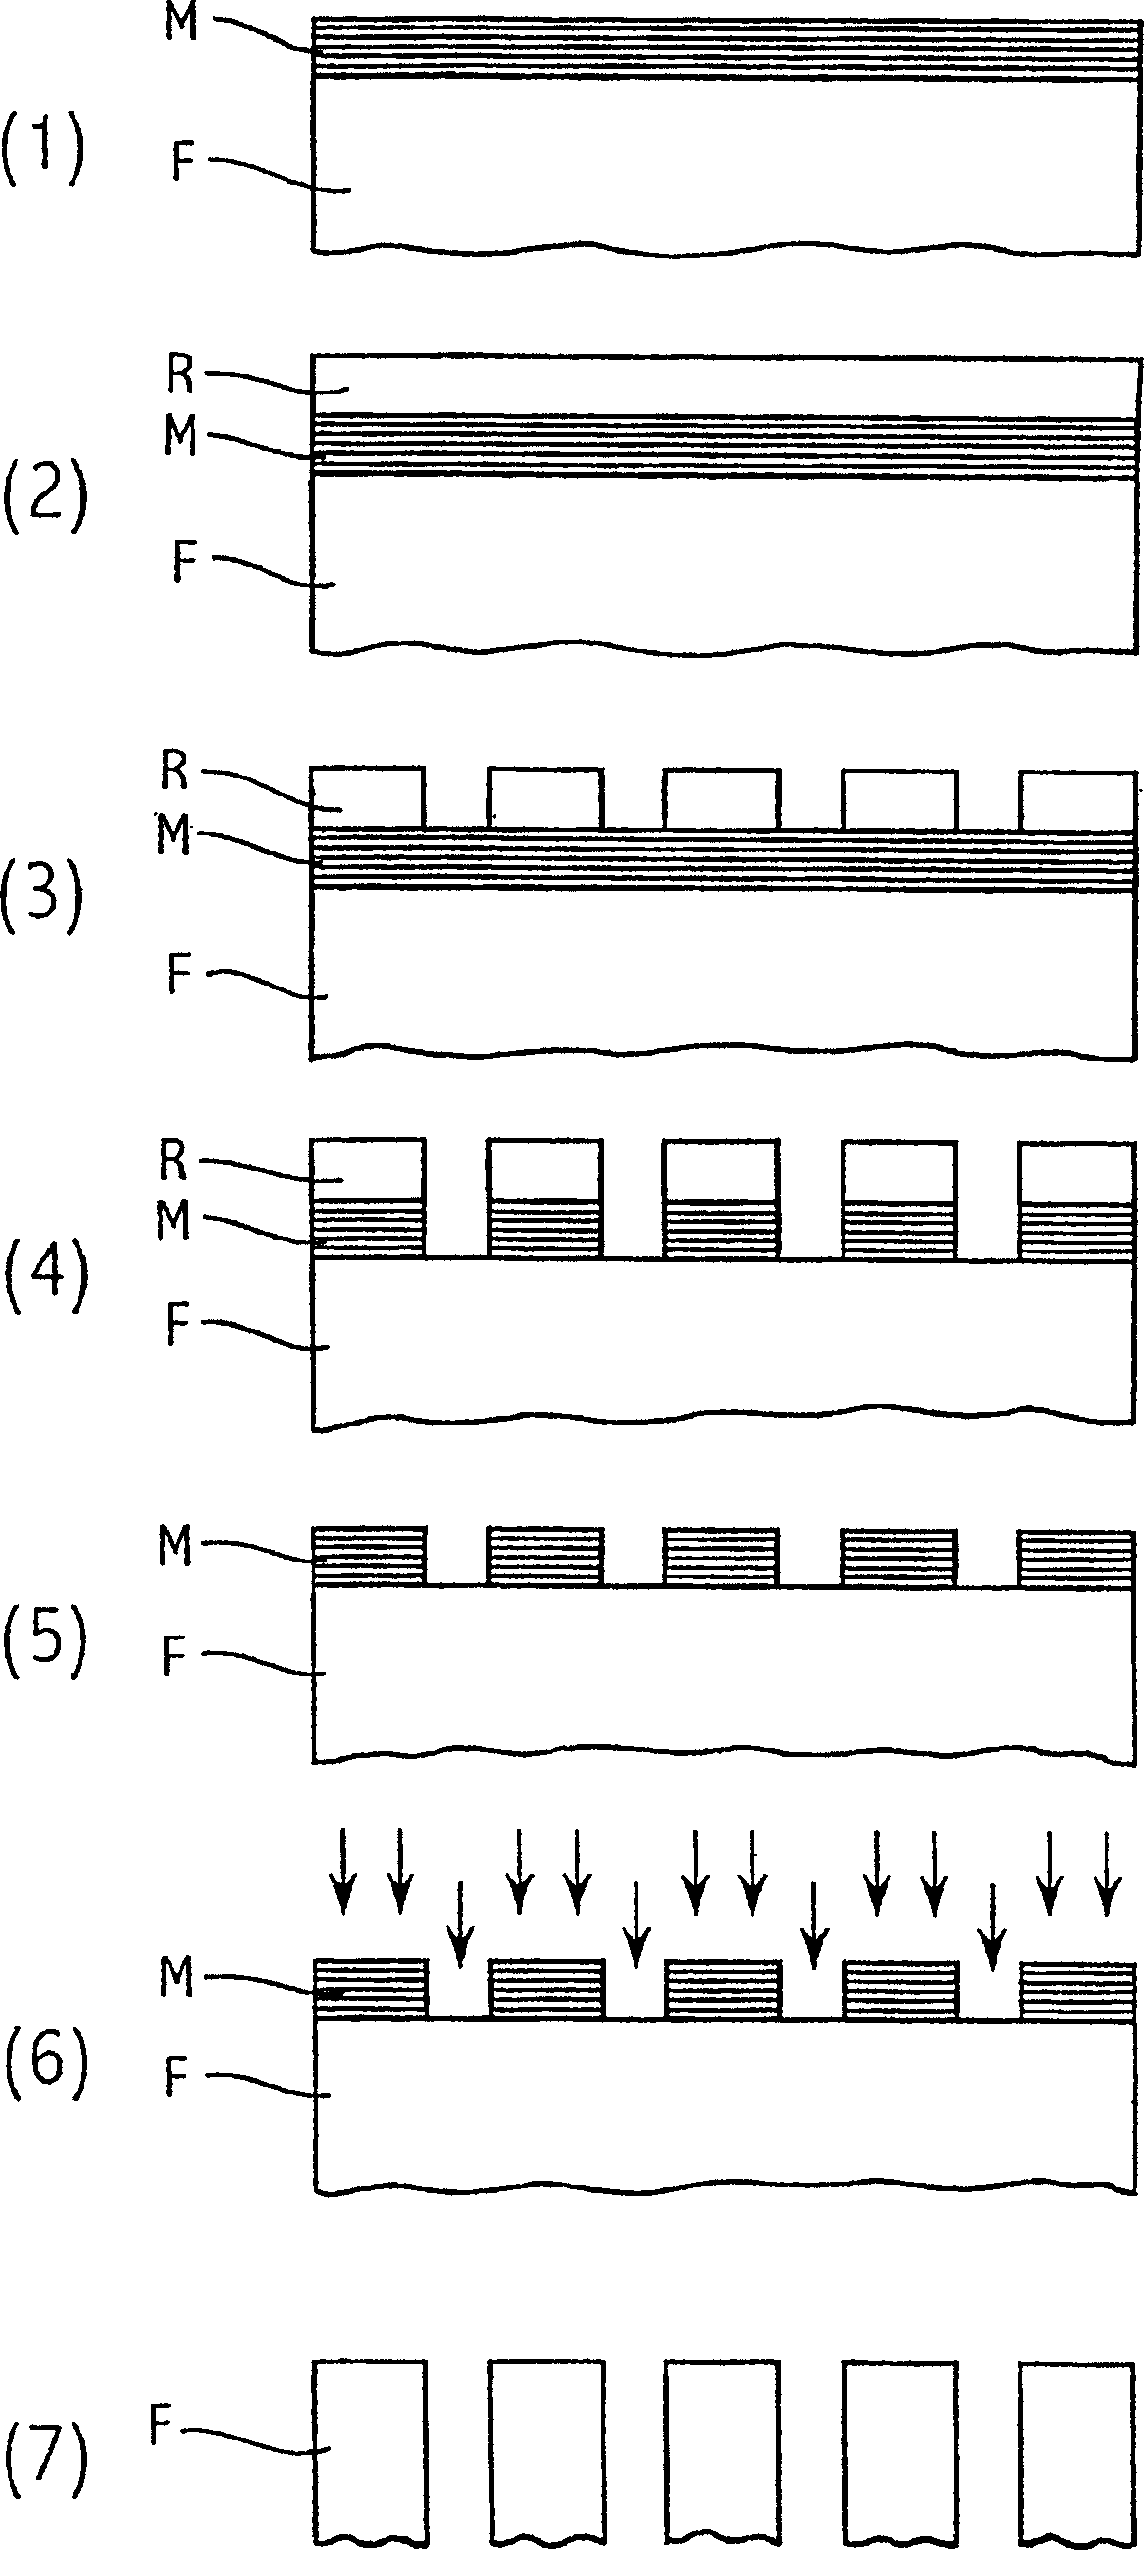 Method of producing a sheet comprising through pores and the application thereof in the production of micronic and submicronic filters